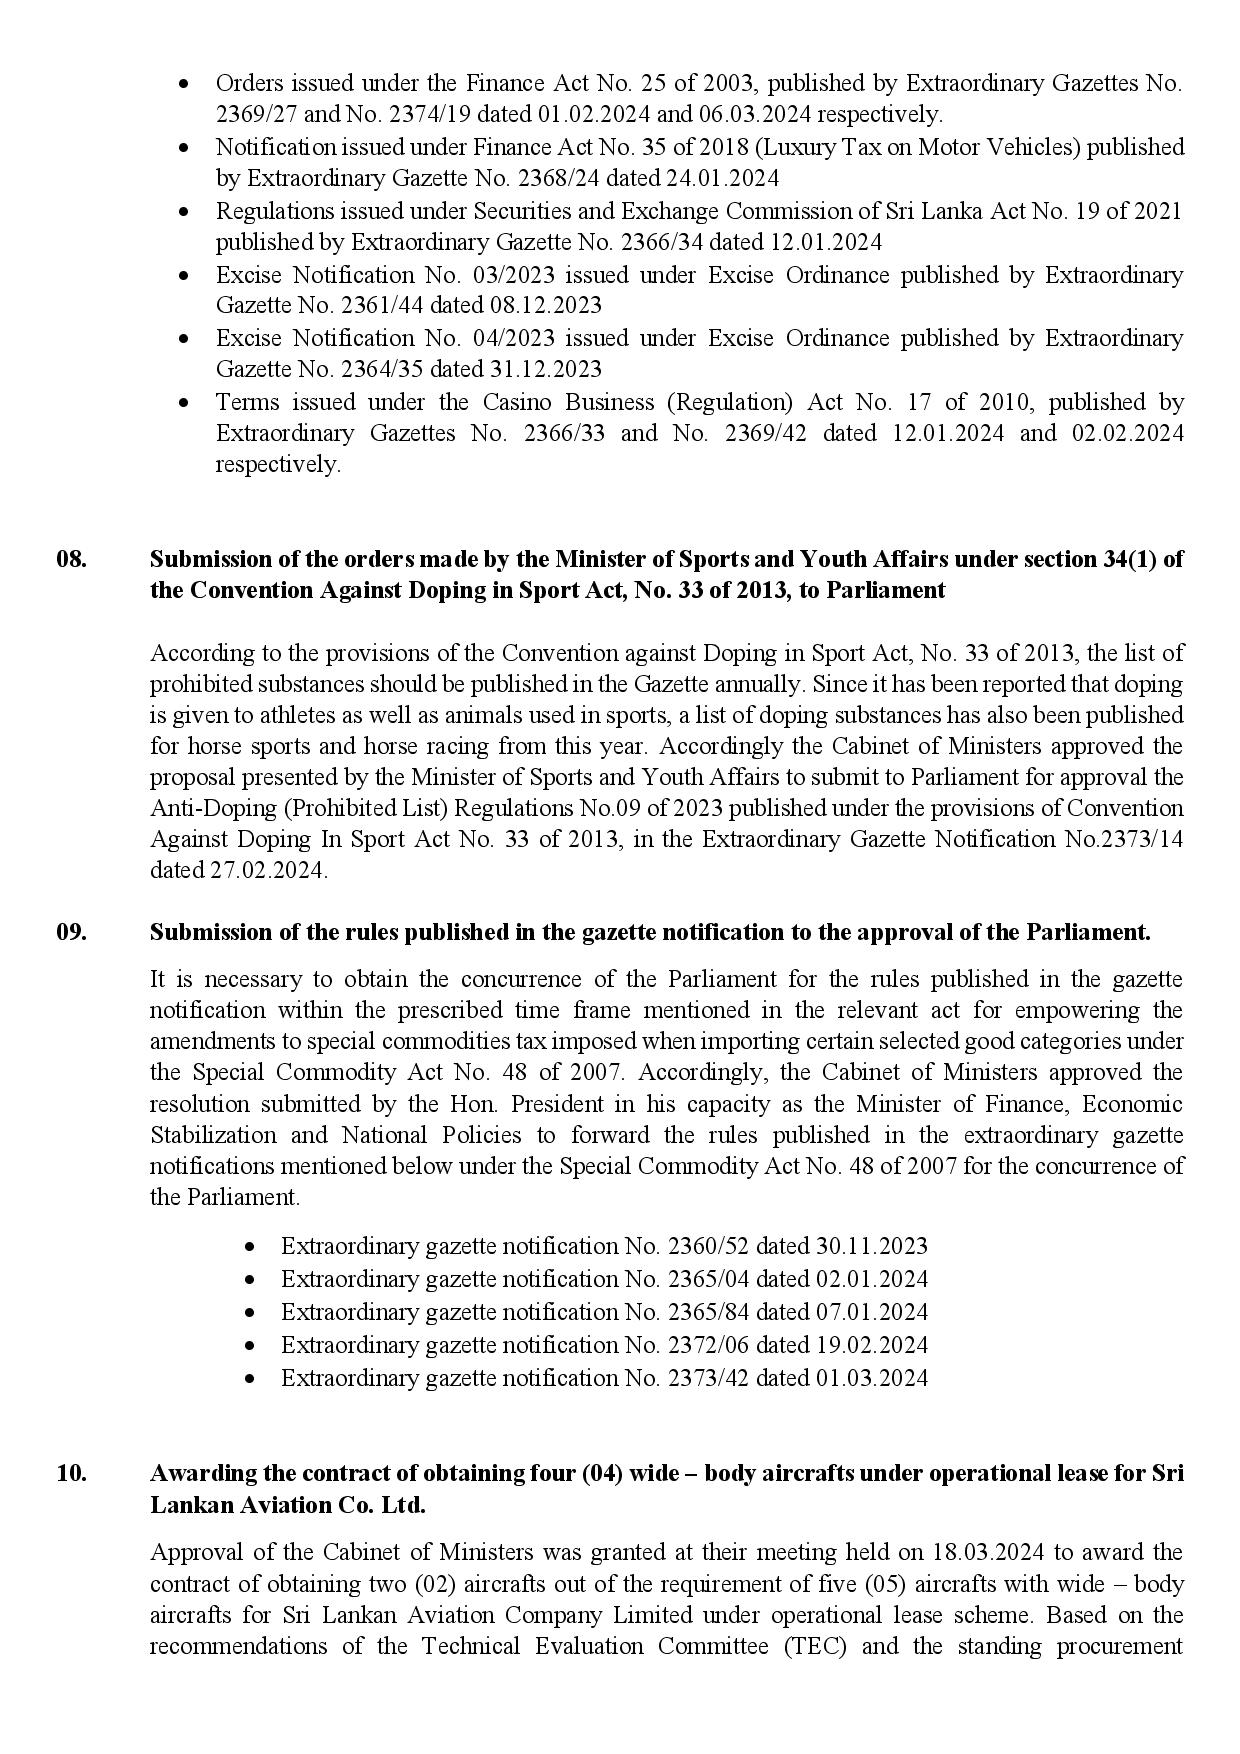 Cabinet Decision on 01.04.2024 English page 003